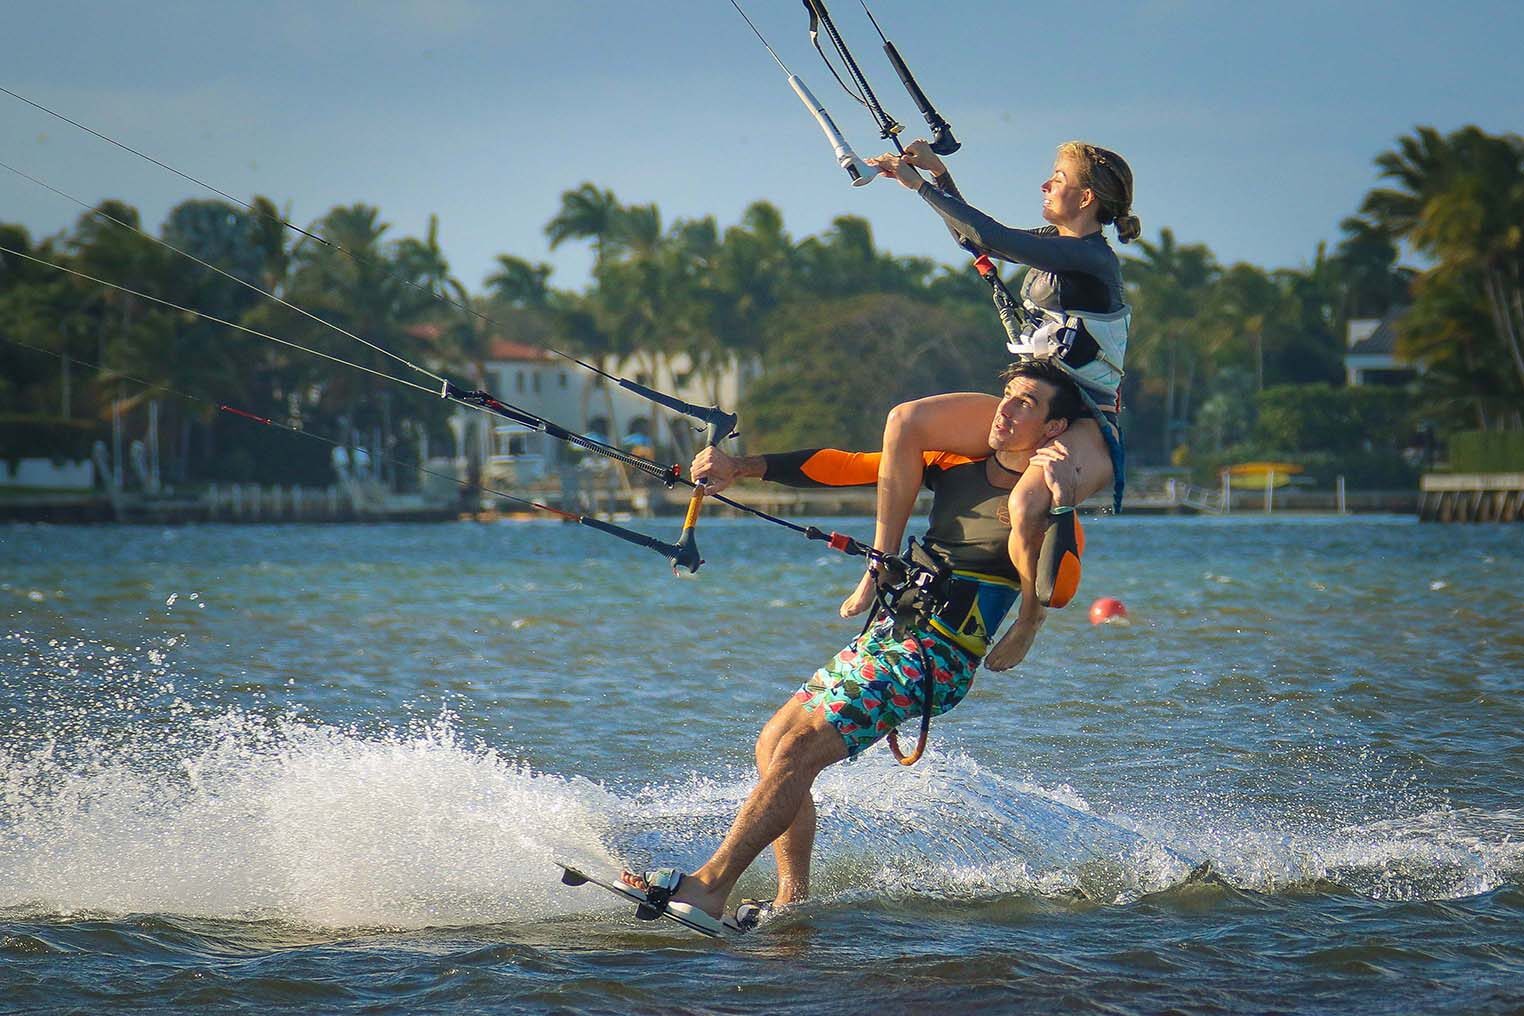 The Top Ten Best Kitesurfing Camps in the USA